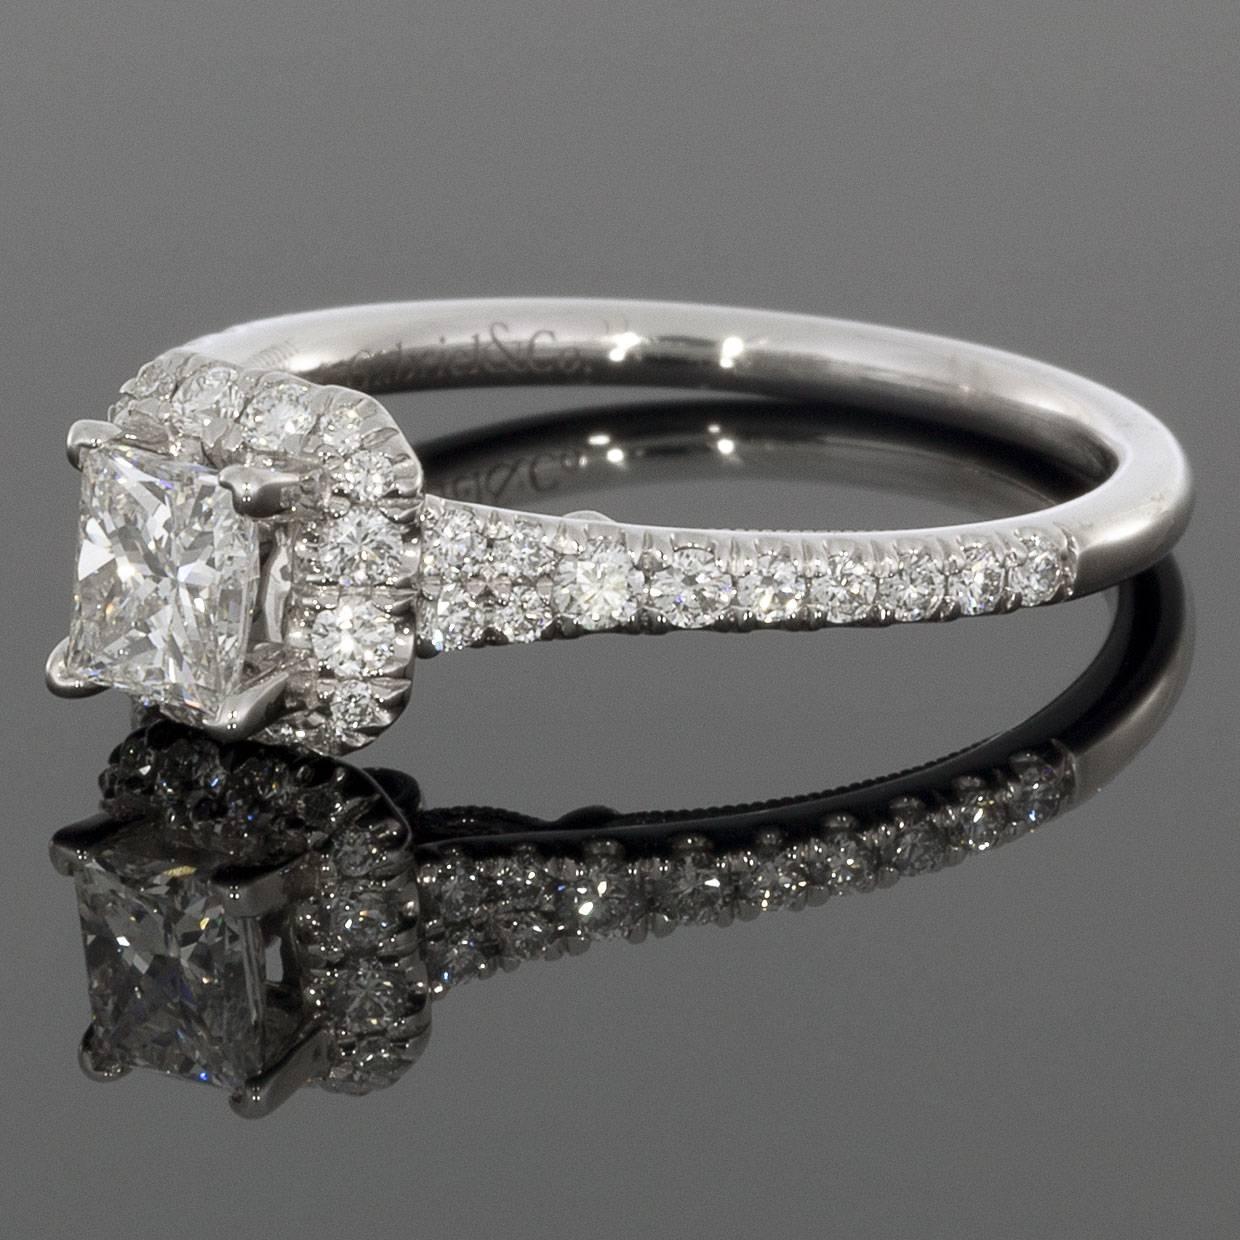 The diamonds are H/SI1 in quality. The ring is a finger size 6.5. Don't miss this gorgeous ring for a fraction of retail! MSRP $3000! 

Details:
Princess Cut Center Diamond
Halo 14k White Gold Setting
.47ct Center Diamond
.86 Total Diamond